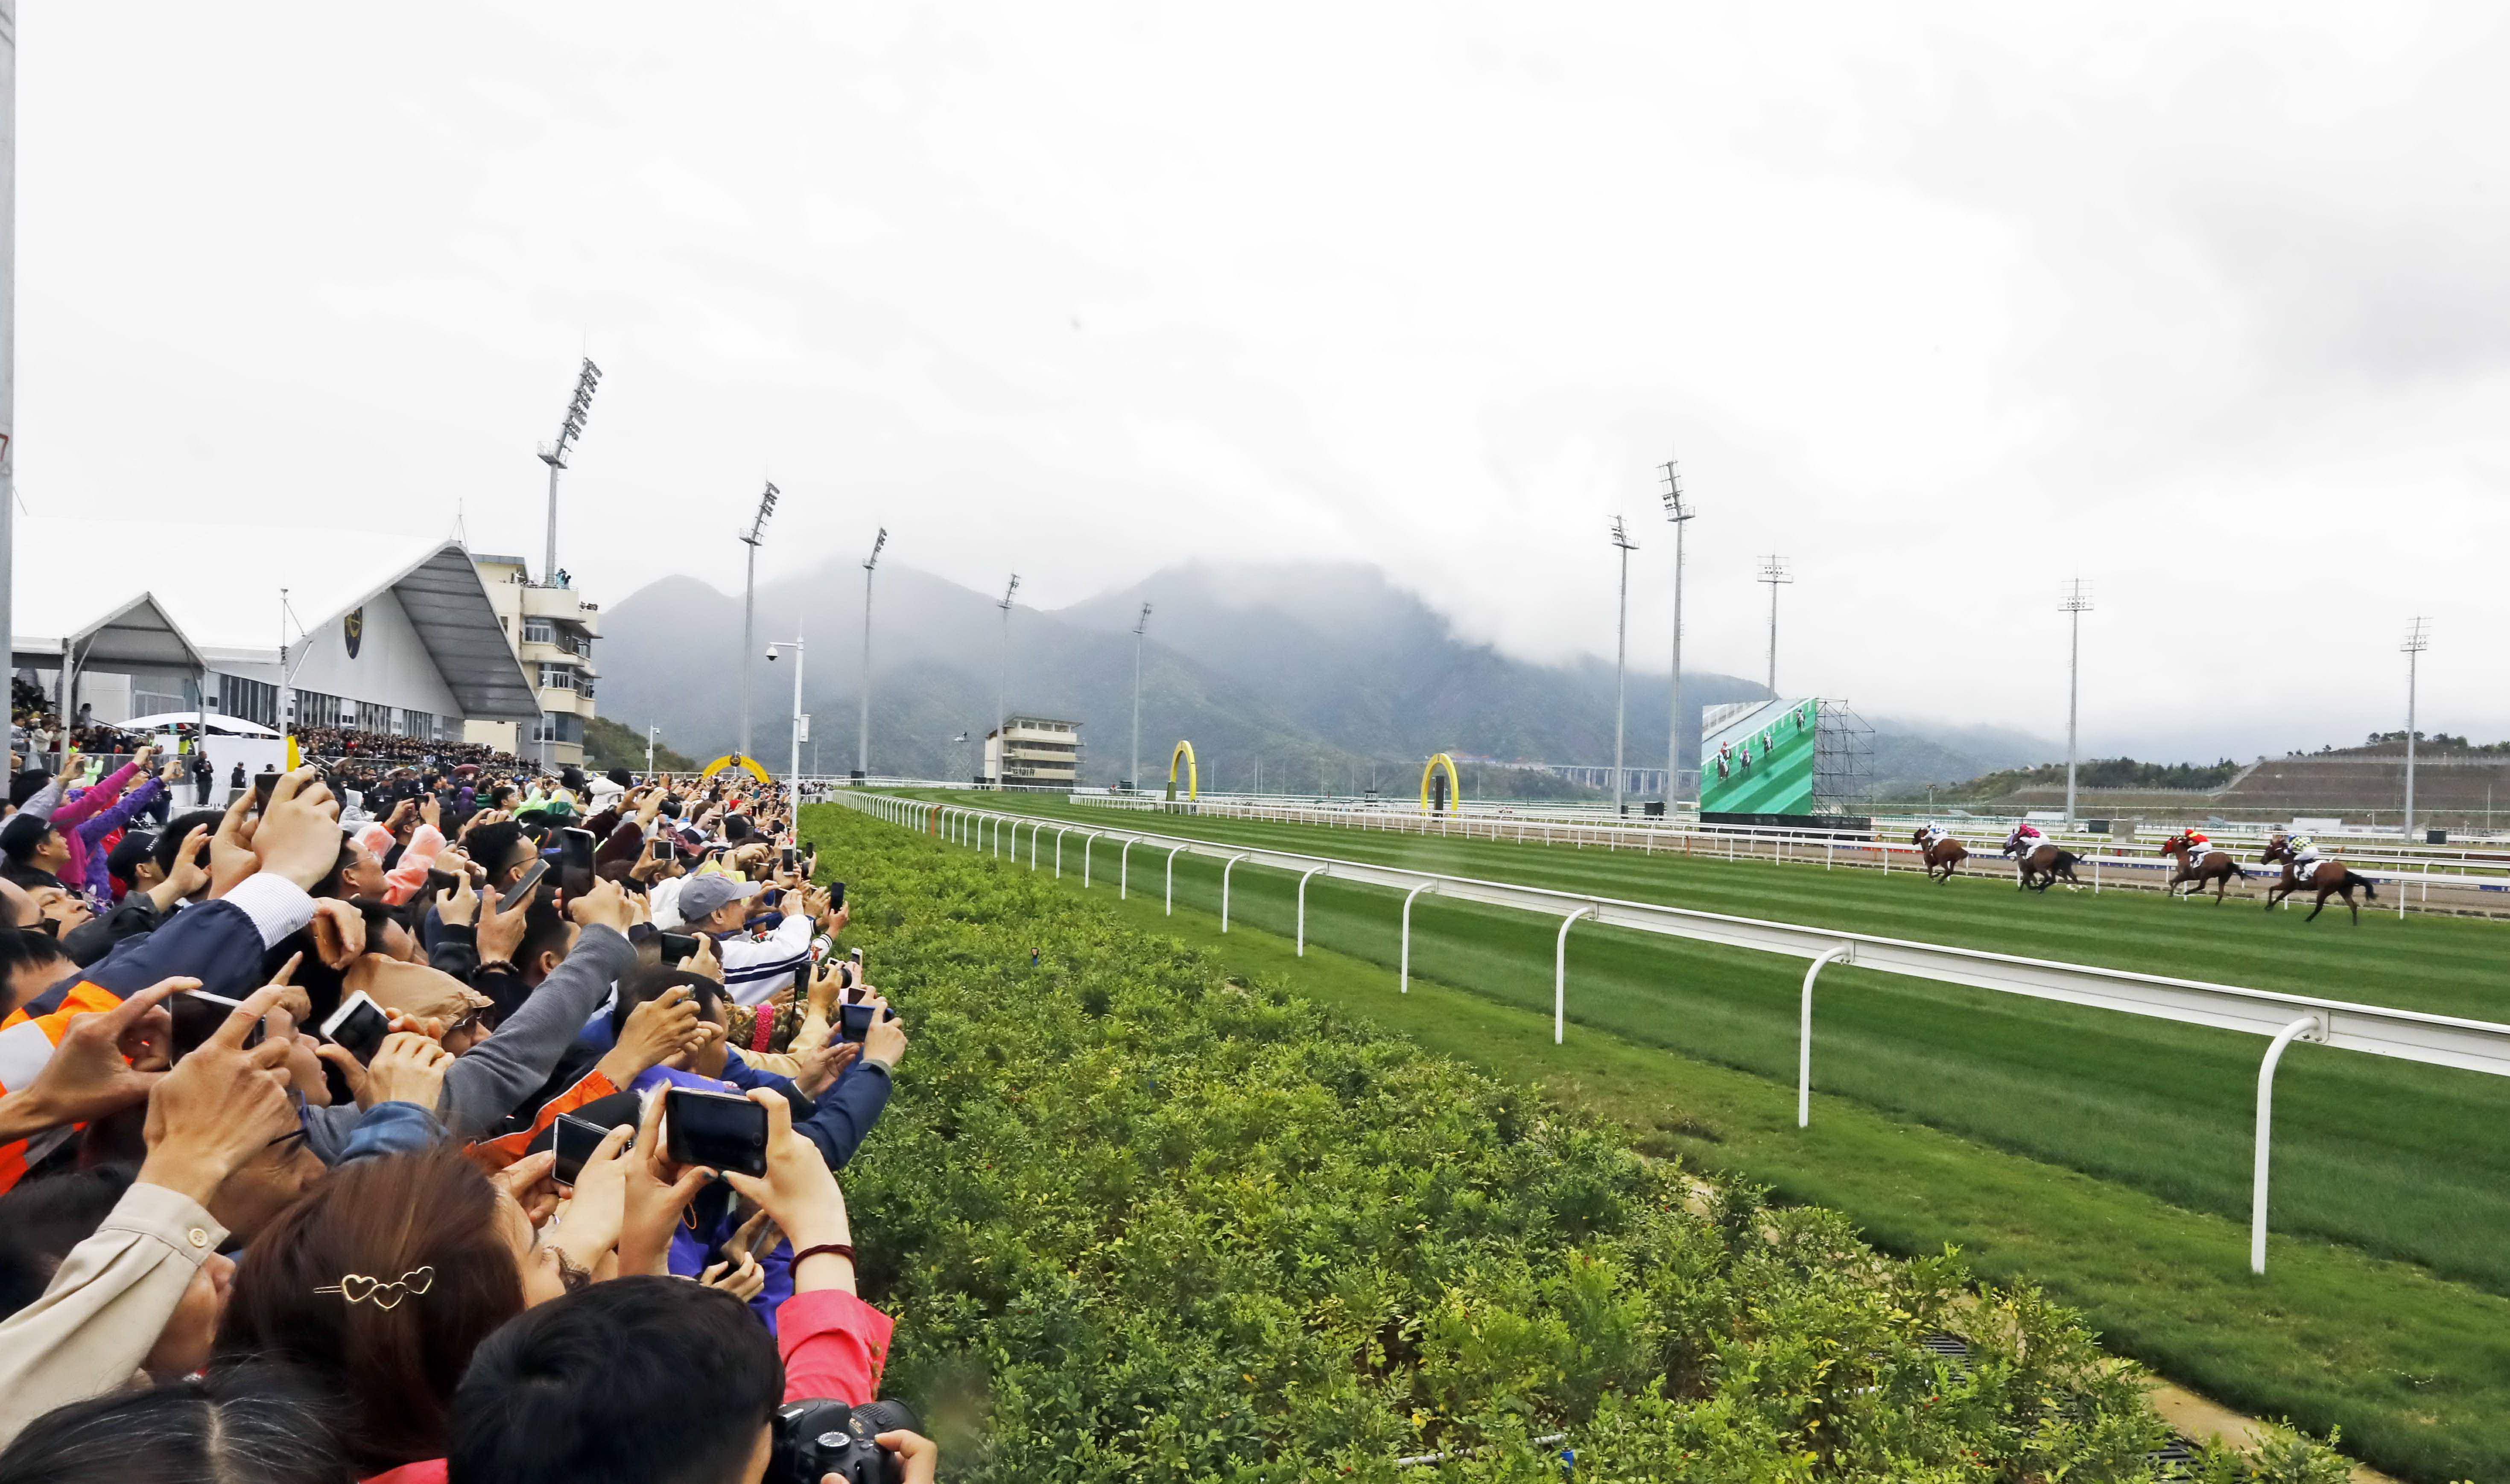 It was estimated that 95 per cent of the 3,500 crowd had never been racing before, but they certainly seemed engrossed by the action. Photo: Hong Kong Jockey Club